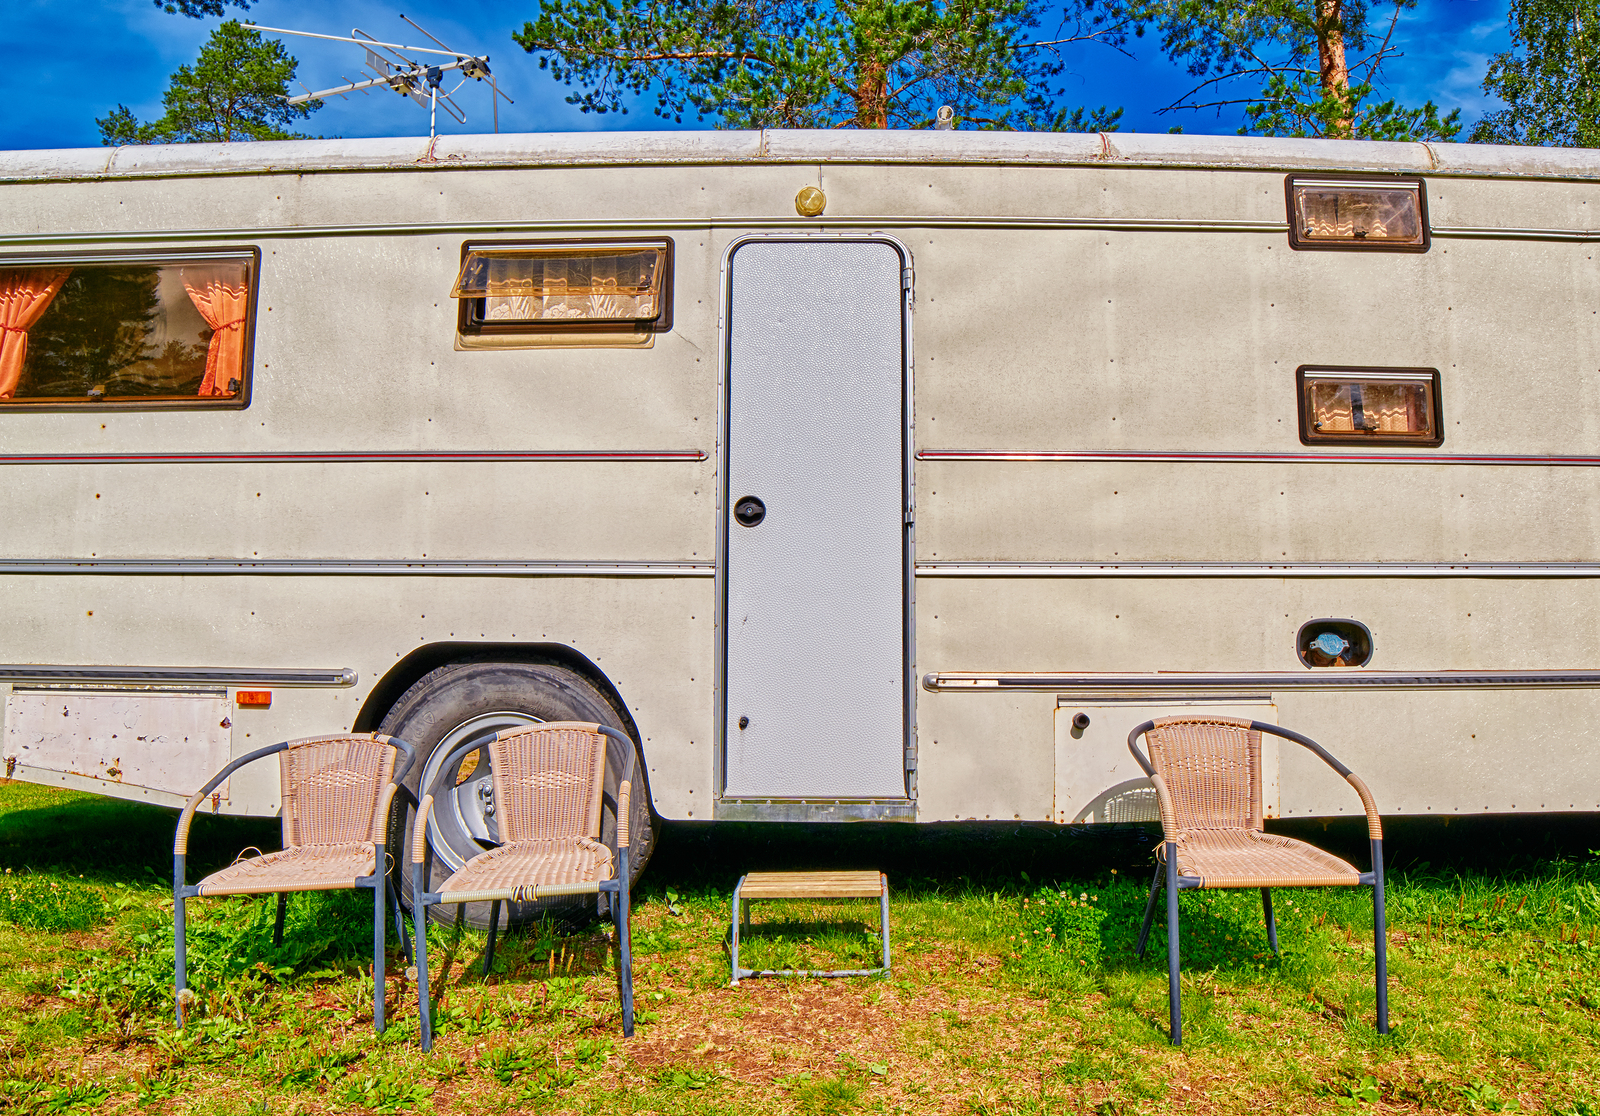 How to Get Rid of an Old Motorhome in LA | Go Junk Free America